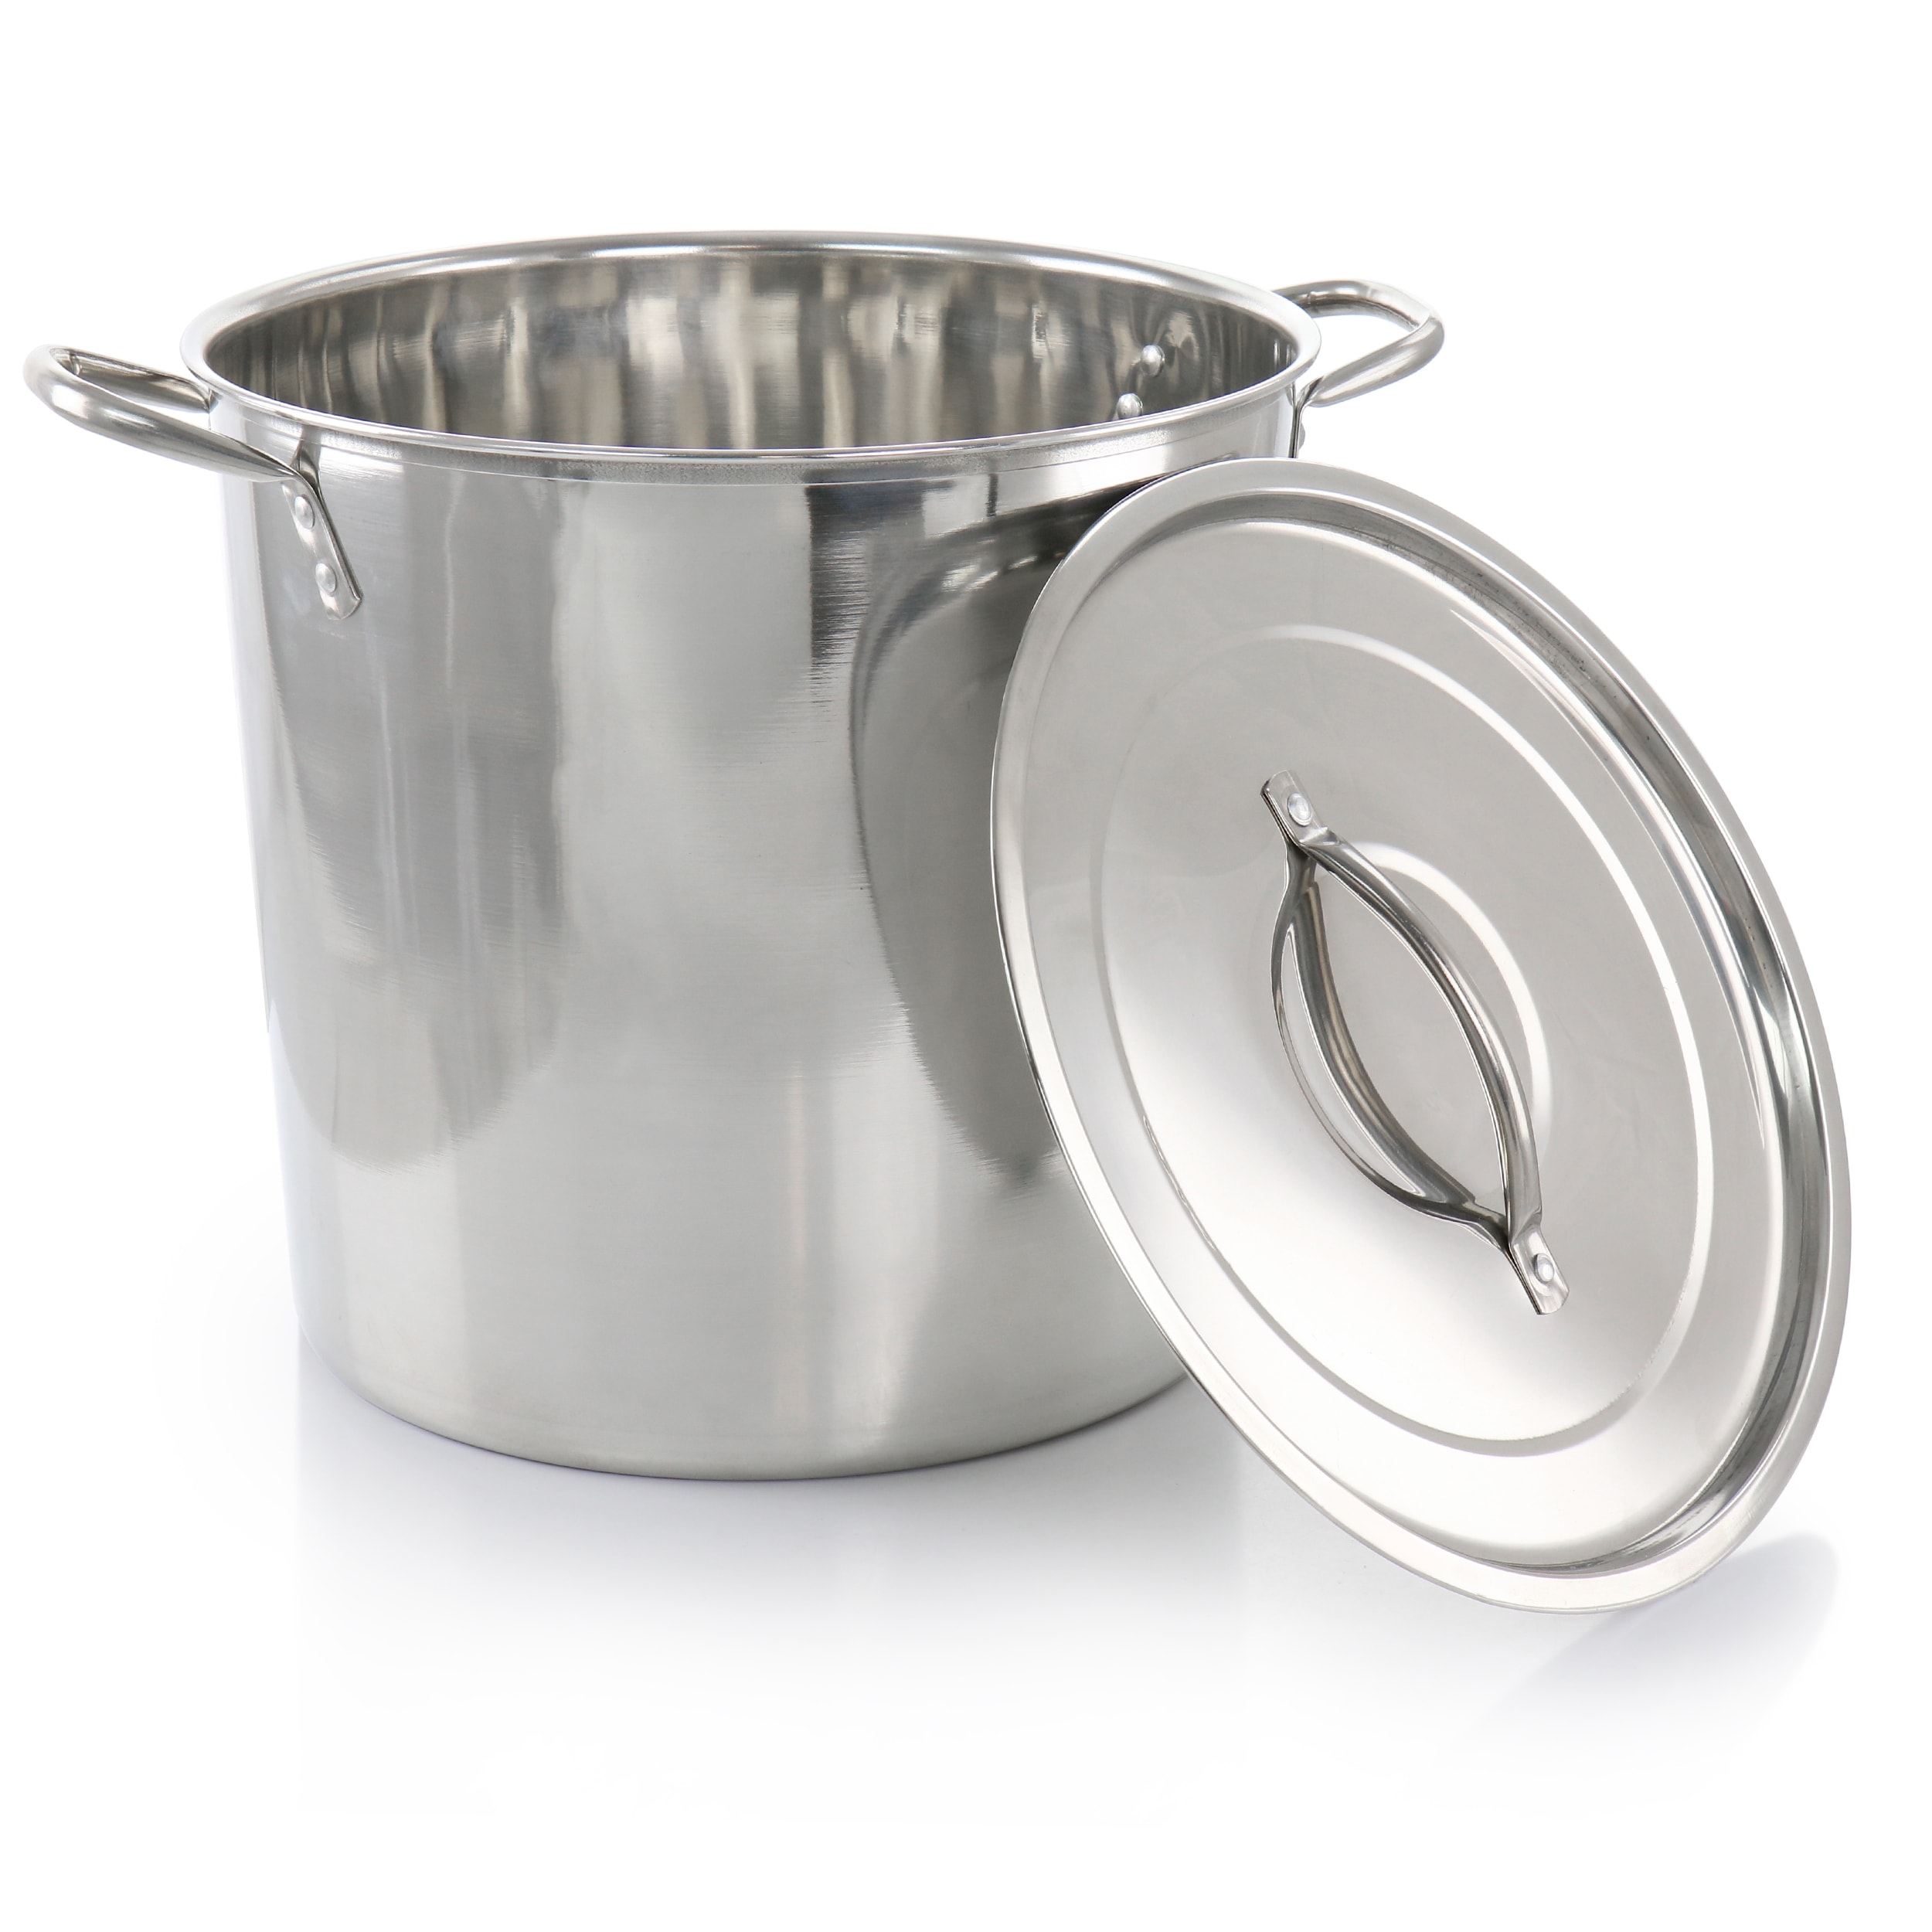 Bergner Essentials 2.6-Quart Stainless Steel Soup Pot with Tempered Glass Lid and Steamer Insert - Silver - 2.6 Quart